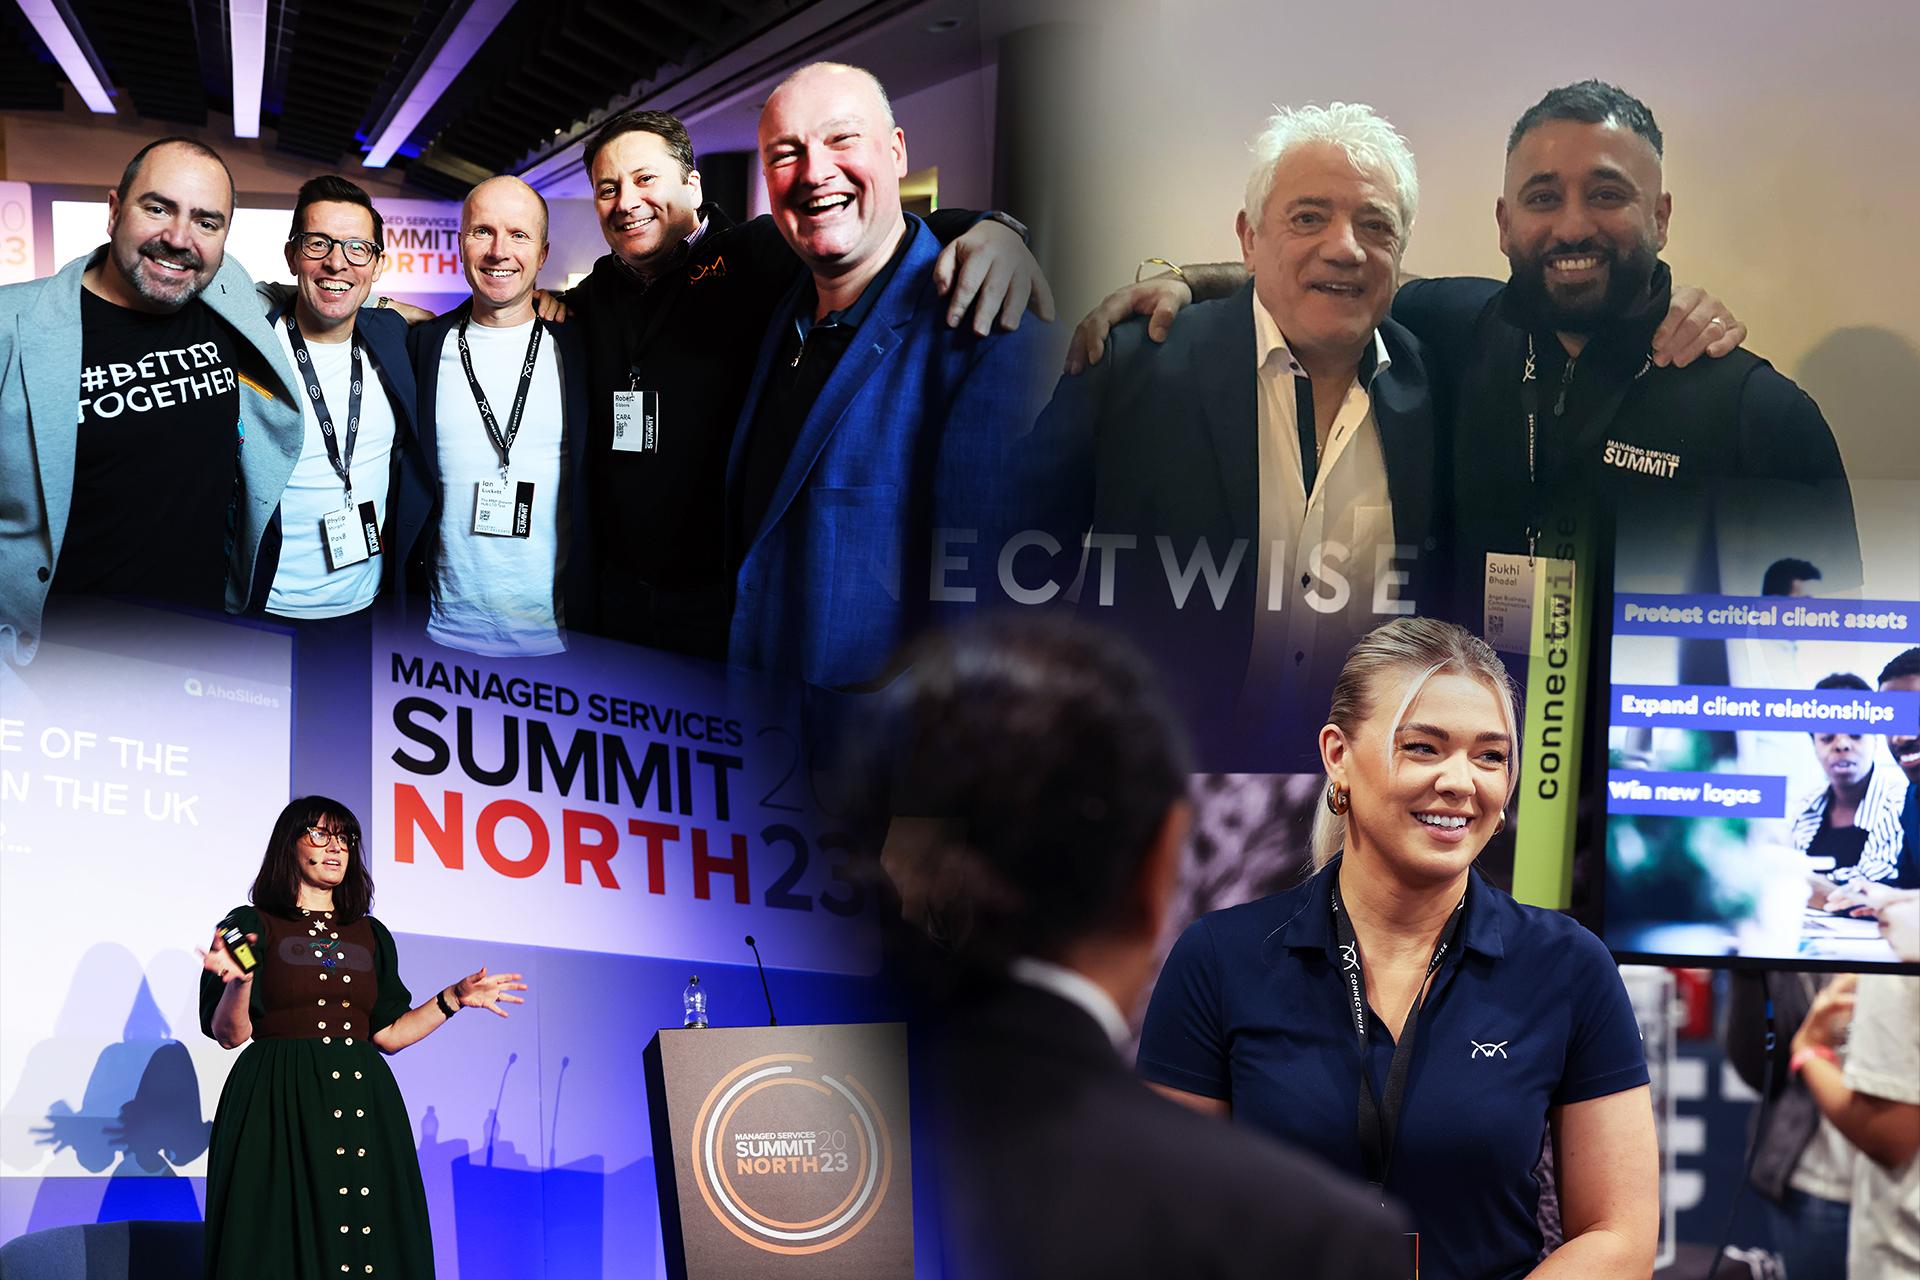 Managed Services Summit North 2023: A Recap of Inspiring Keynotes, Sponsors, and Future Plans